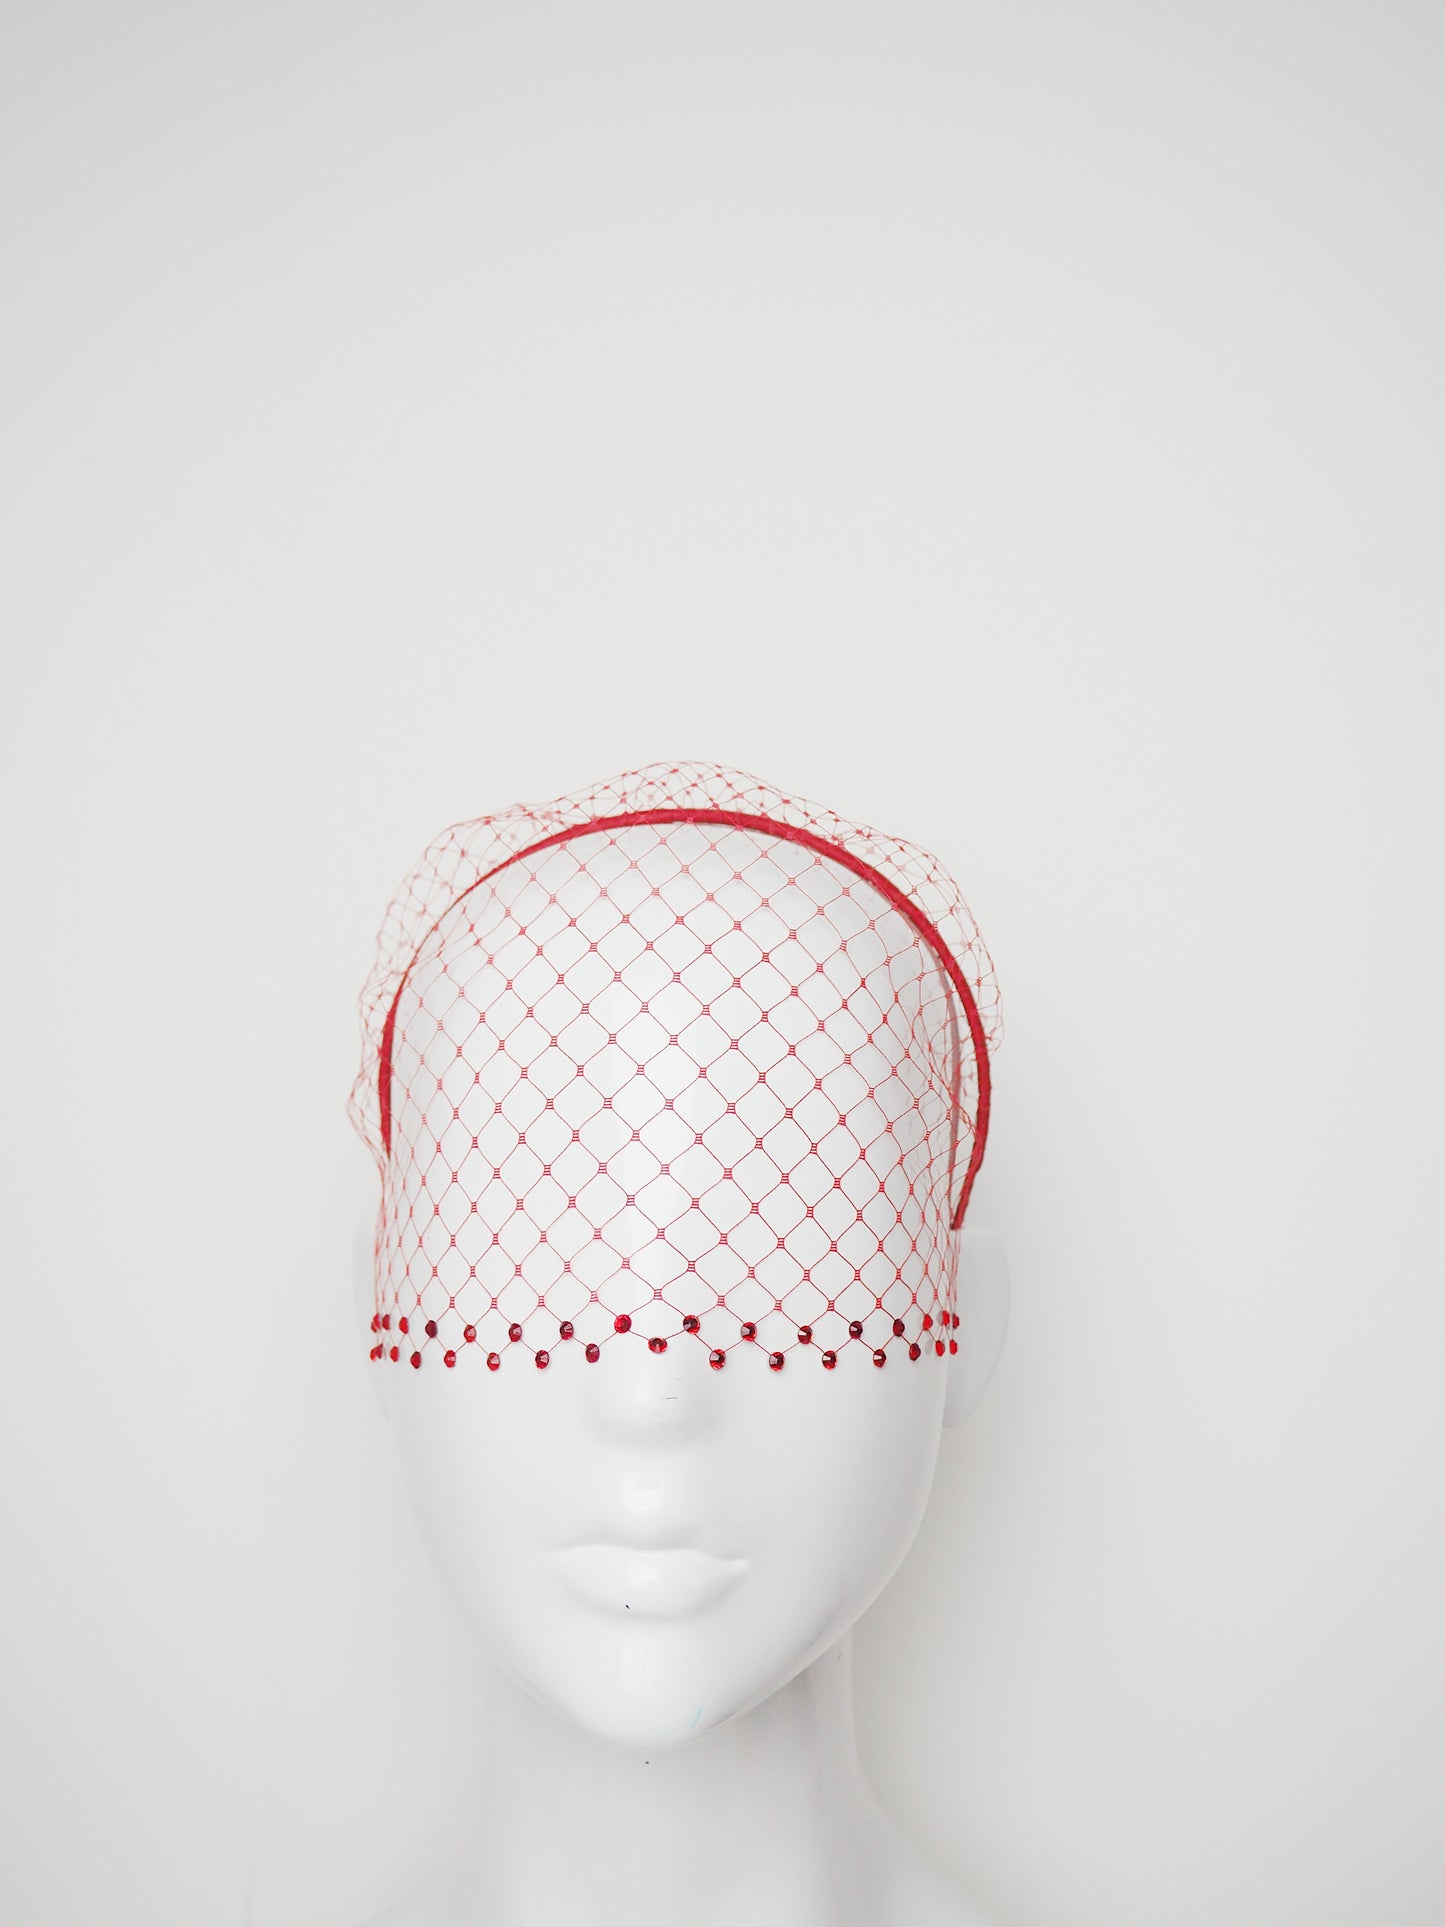 Gracie - Embellished fine Veil - Red with siam crystal detail